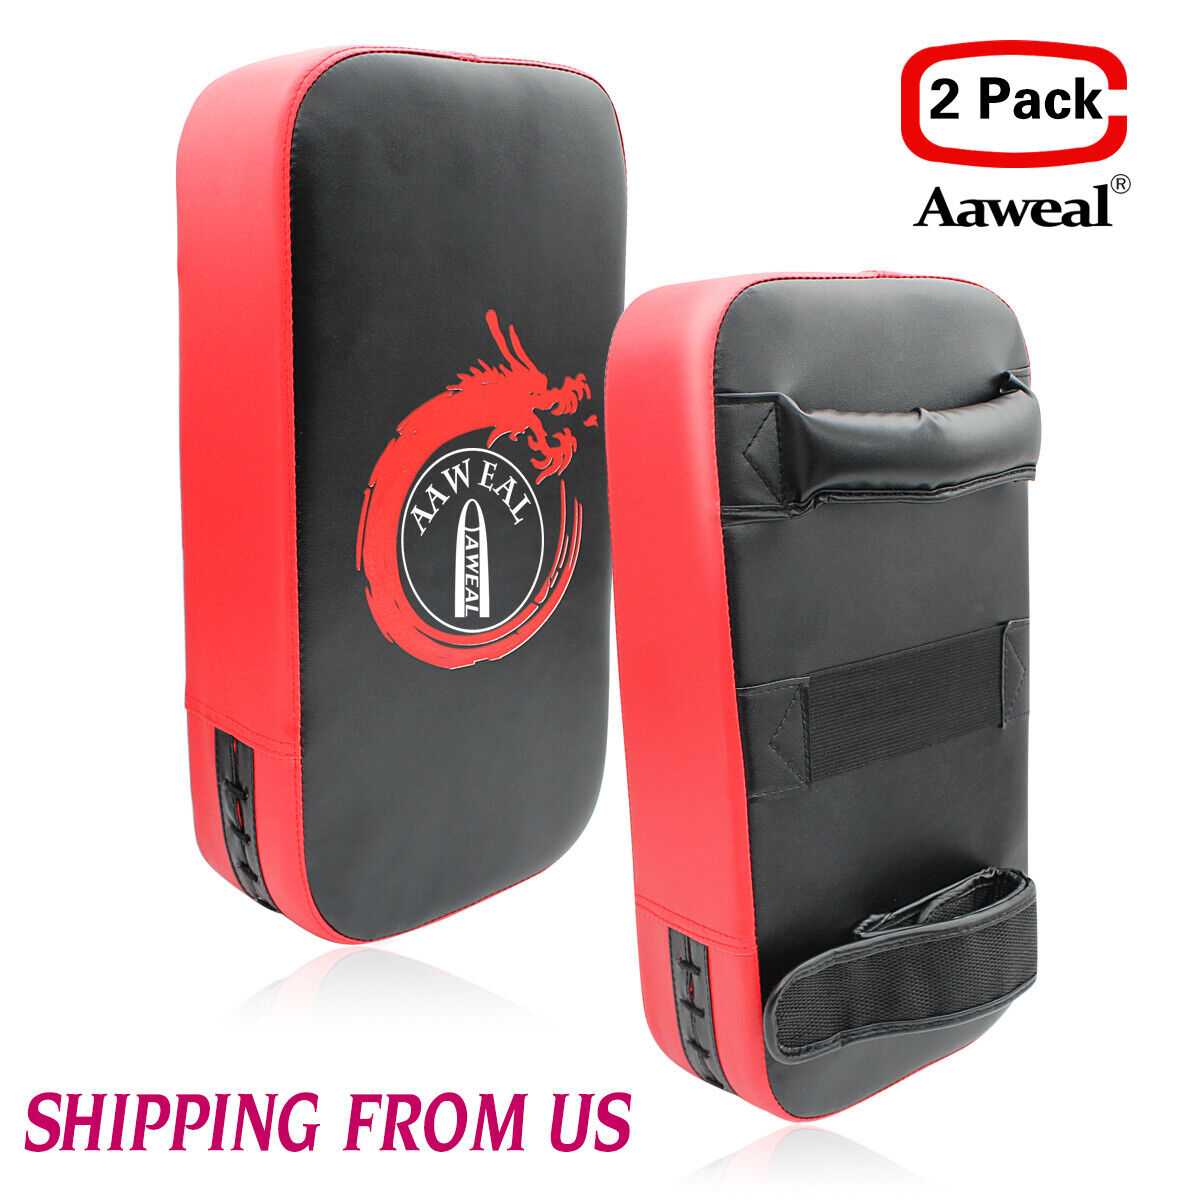 Kick Shield Boxing Punching Pads Strike Arm Curved MMA Focus Muay Thai Training Aaweal Does Not Apply